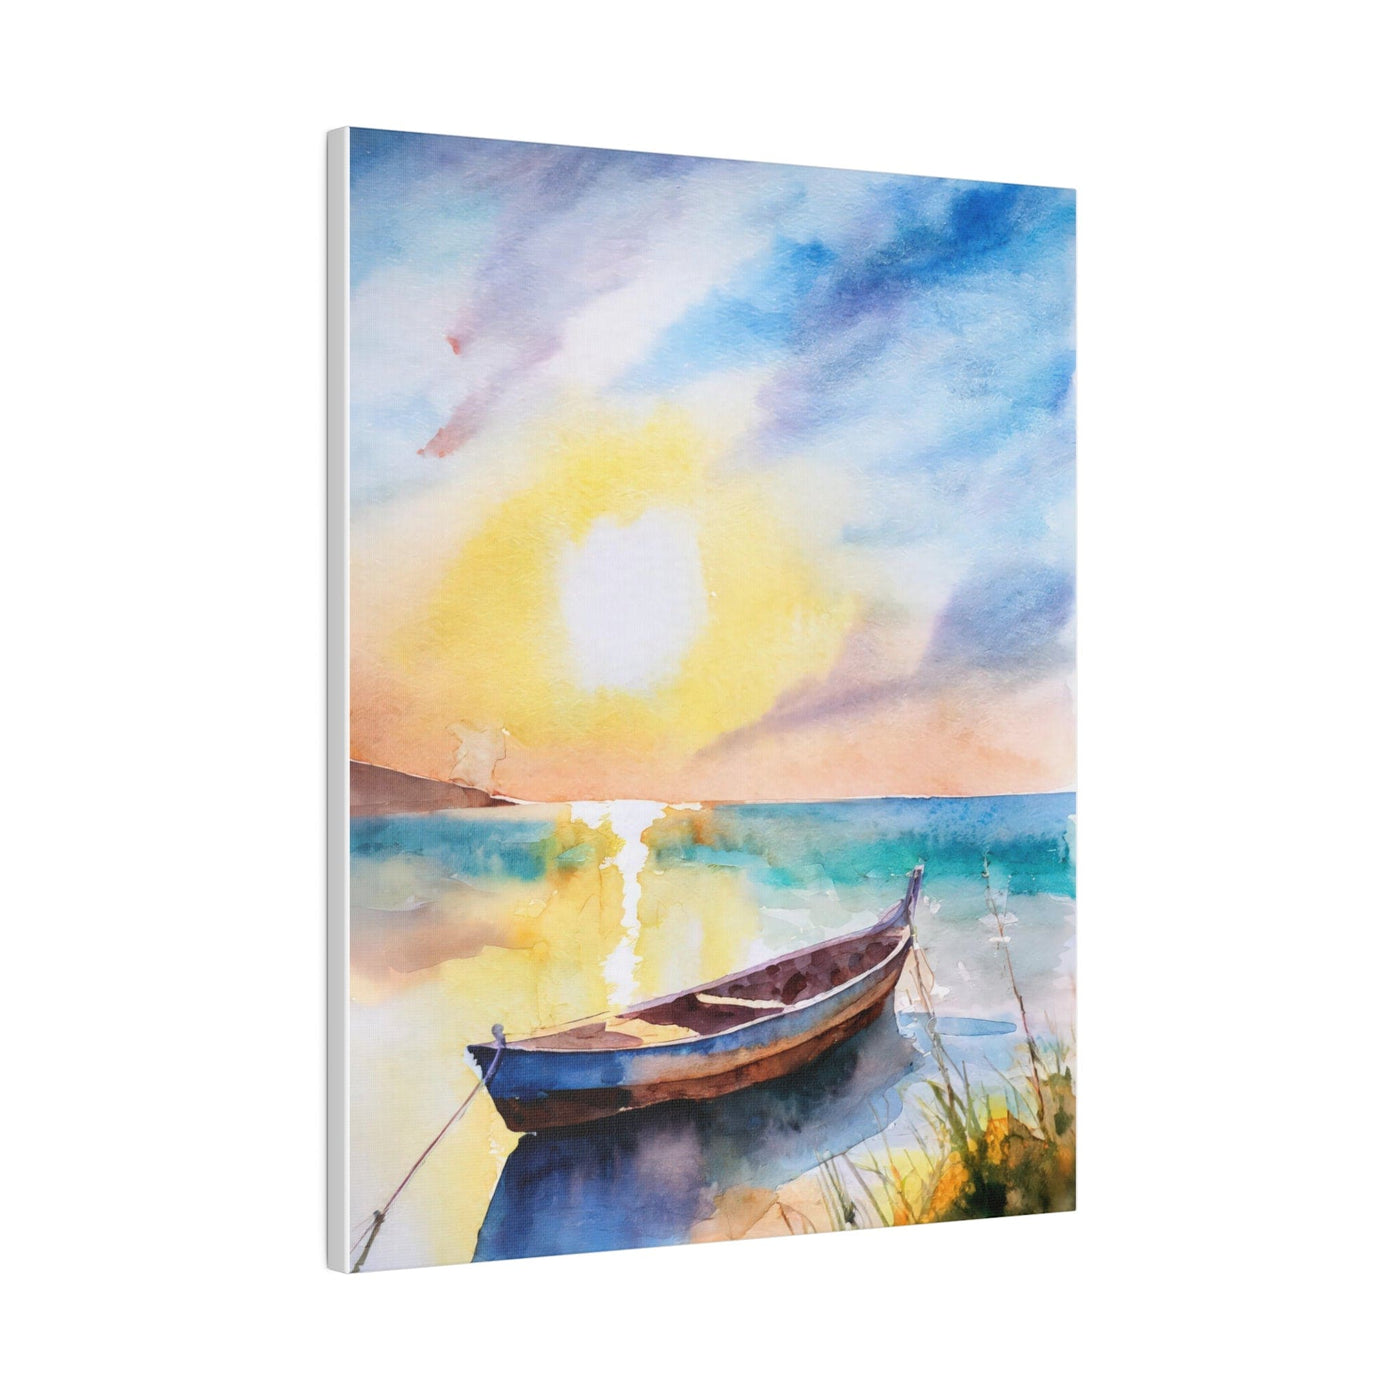 Fine Wall Art Print Home Office Decor Sunset By The Sea - Canvas